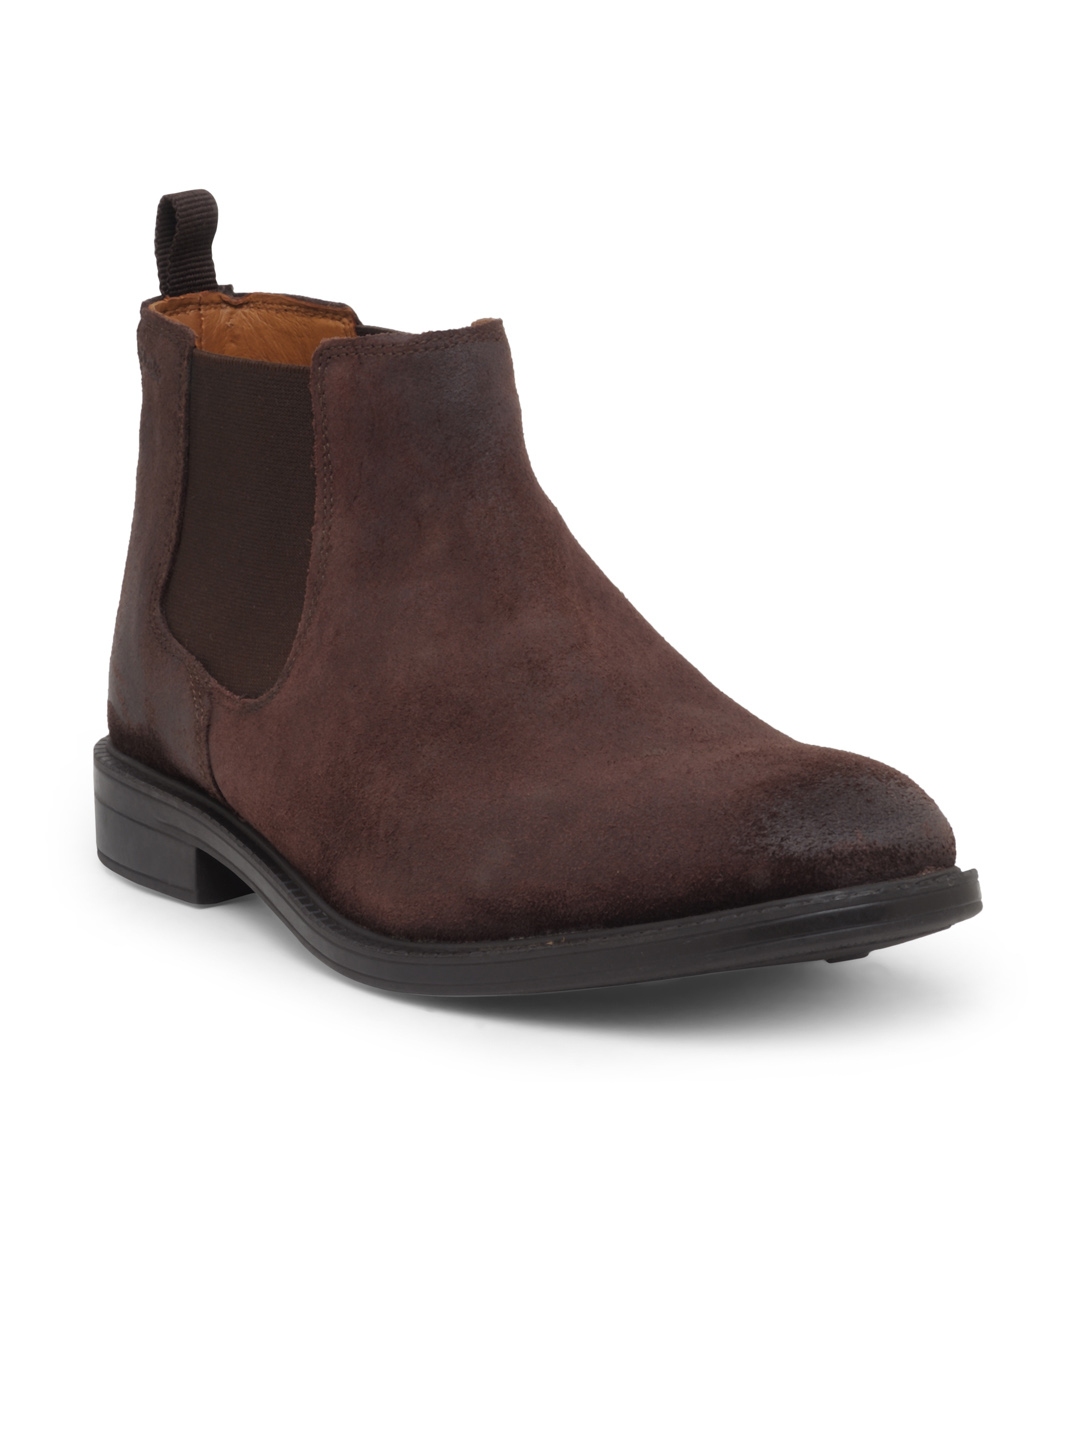 clarks chelsea boots brown